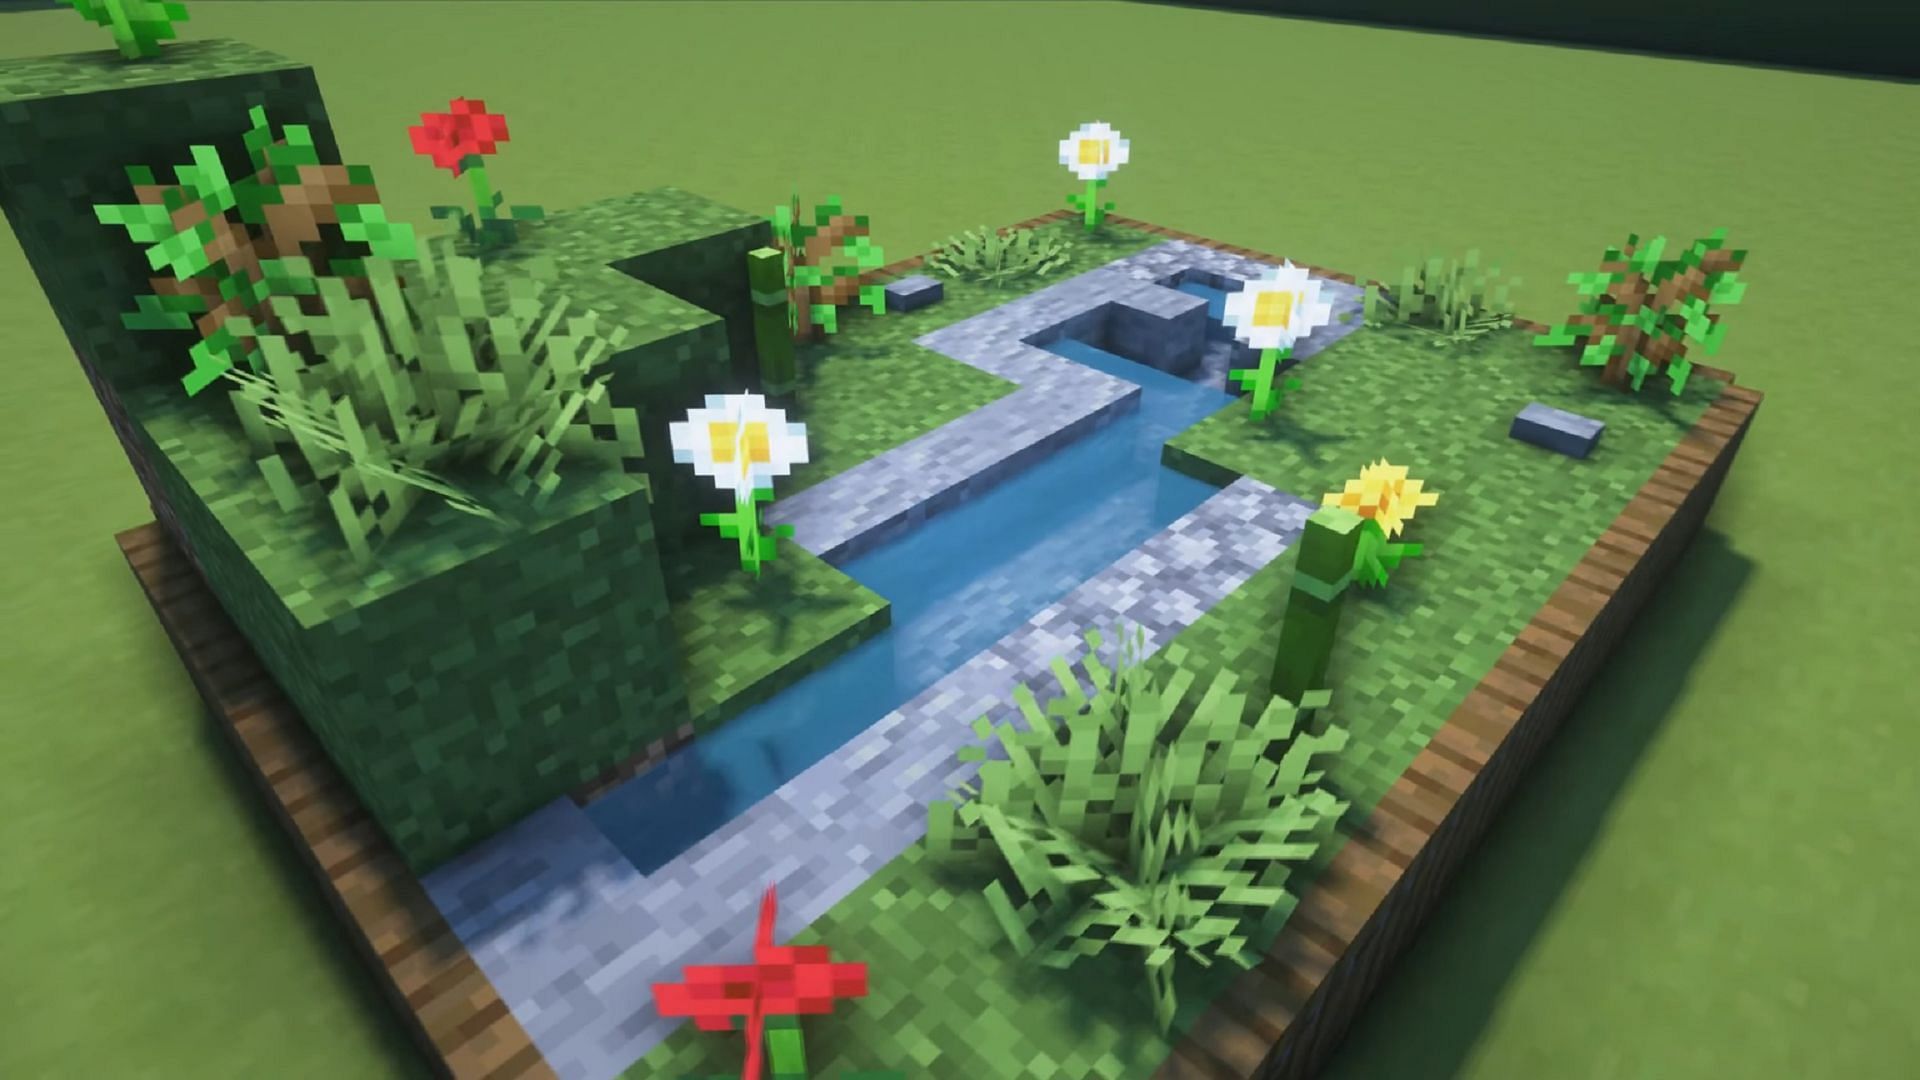 Mini biomes are a fun decorative project that works great for Minecraft players of any skill level (Image via Mojang)